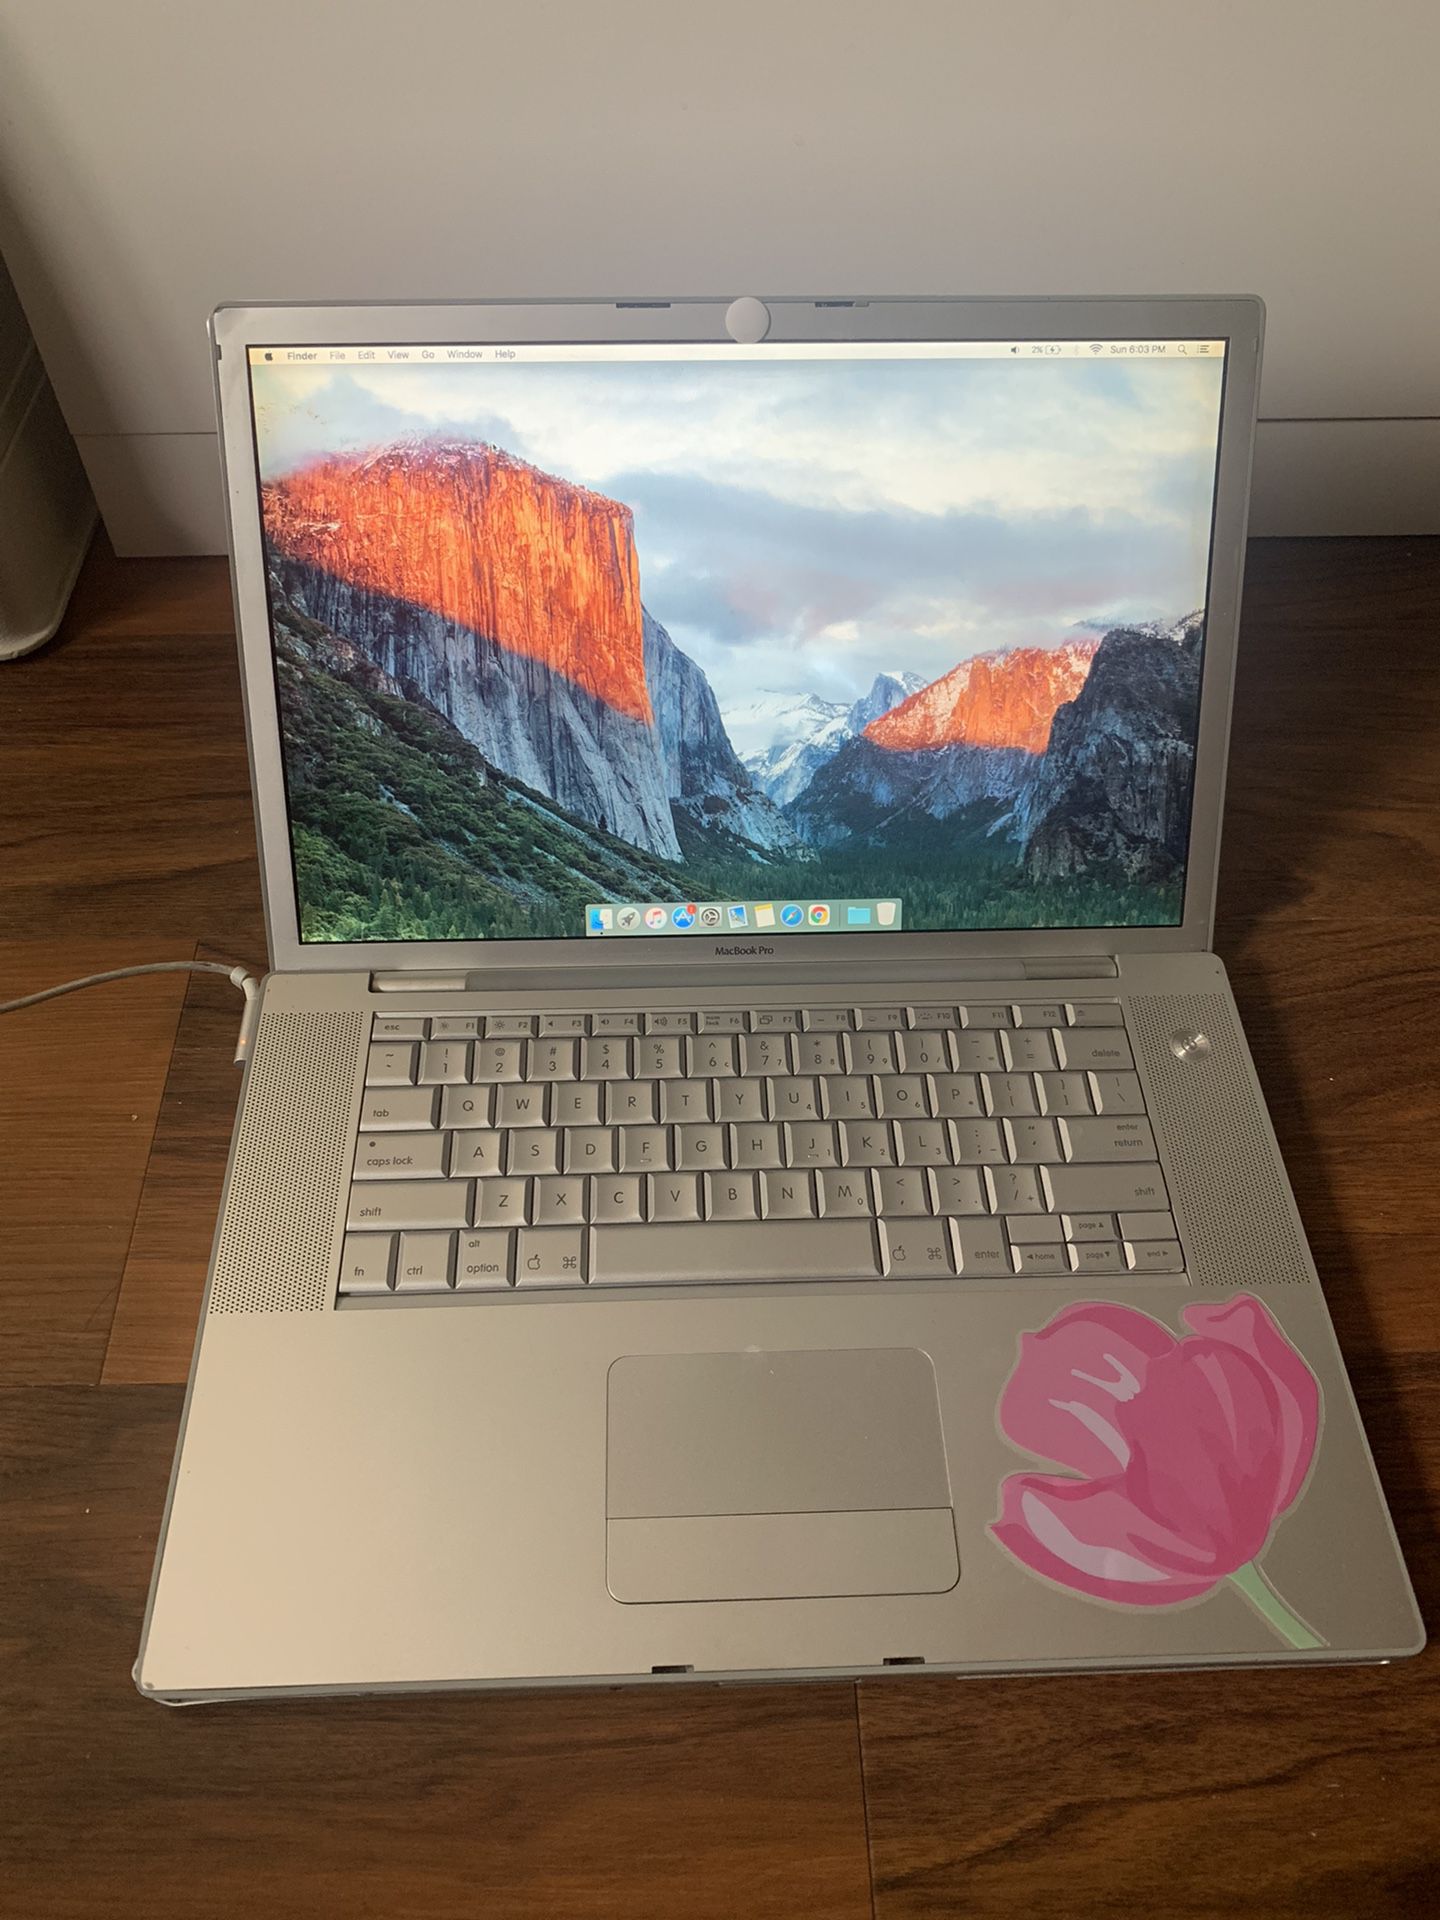 15" Apple MacBook Pro - 2.4Ghz Intel Dual Core Processor - 2 GB RAM upgradable to max. 6gb) - 256MB NVIDIA GeForce Graphics Card - Super DVD Writer Dr